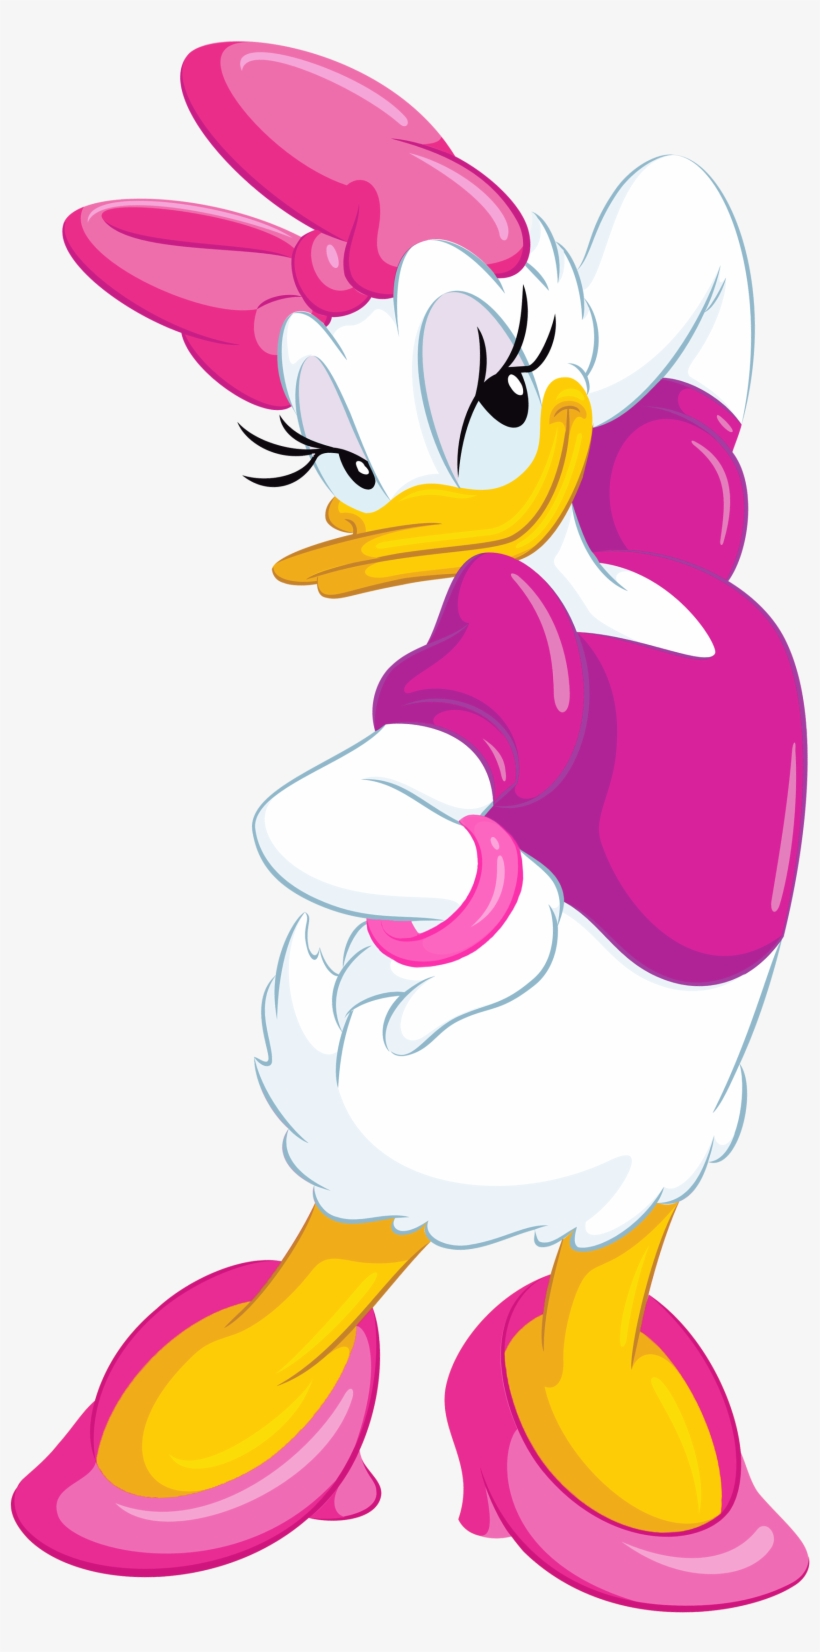 Clip Library Duck Png Clip Art Image The World - Daisy Duck Png, transparent png #11010